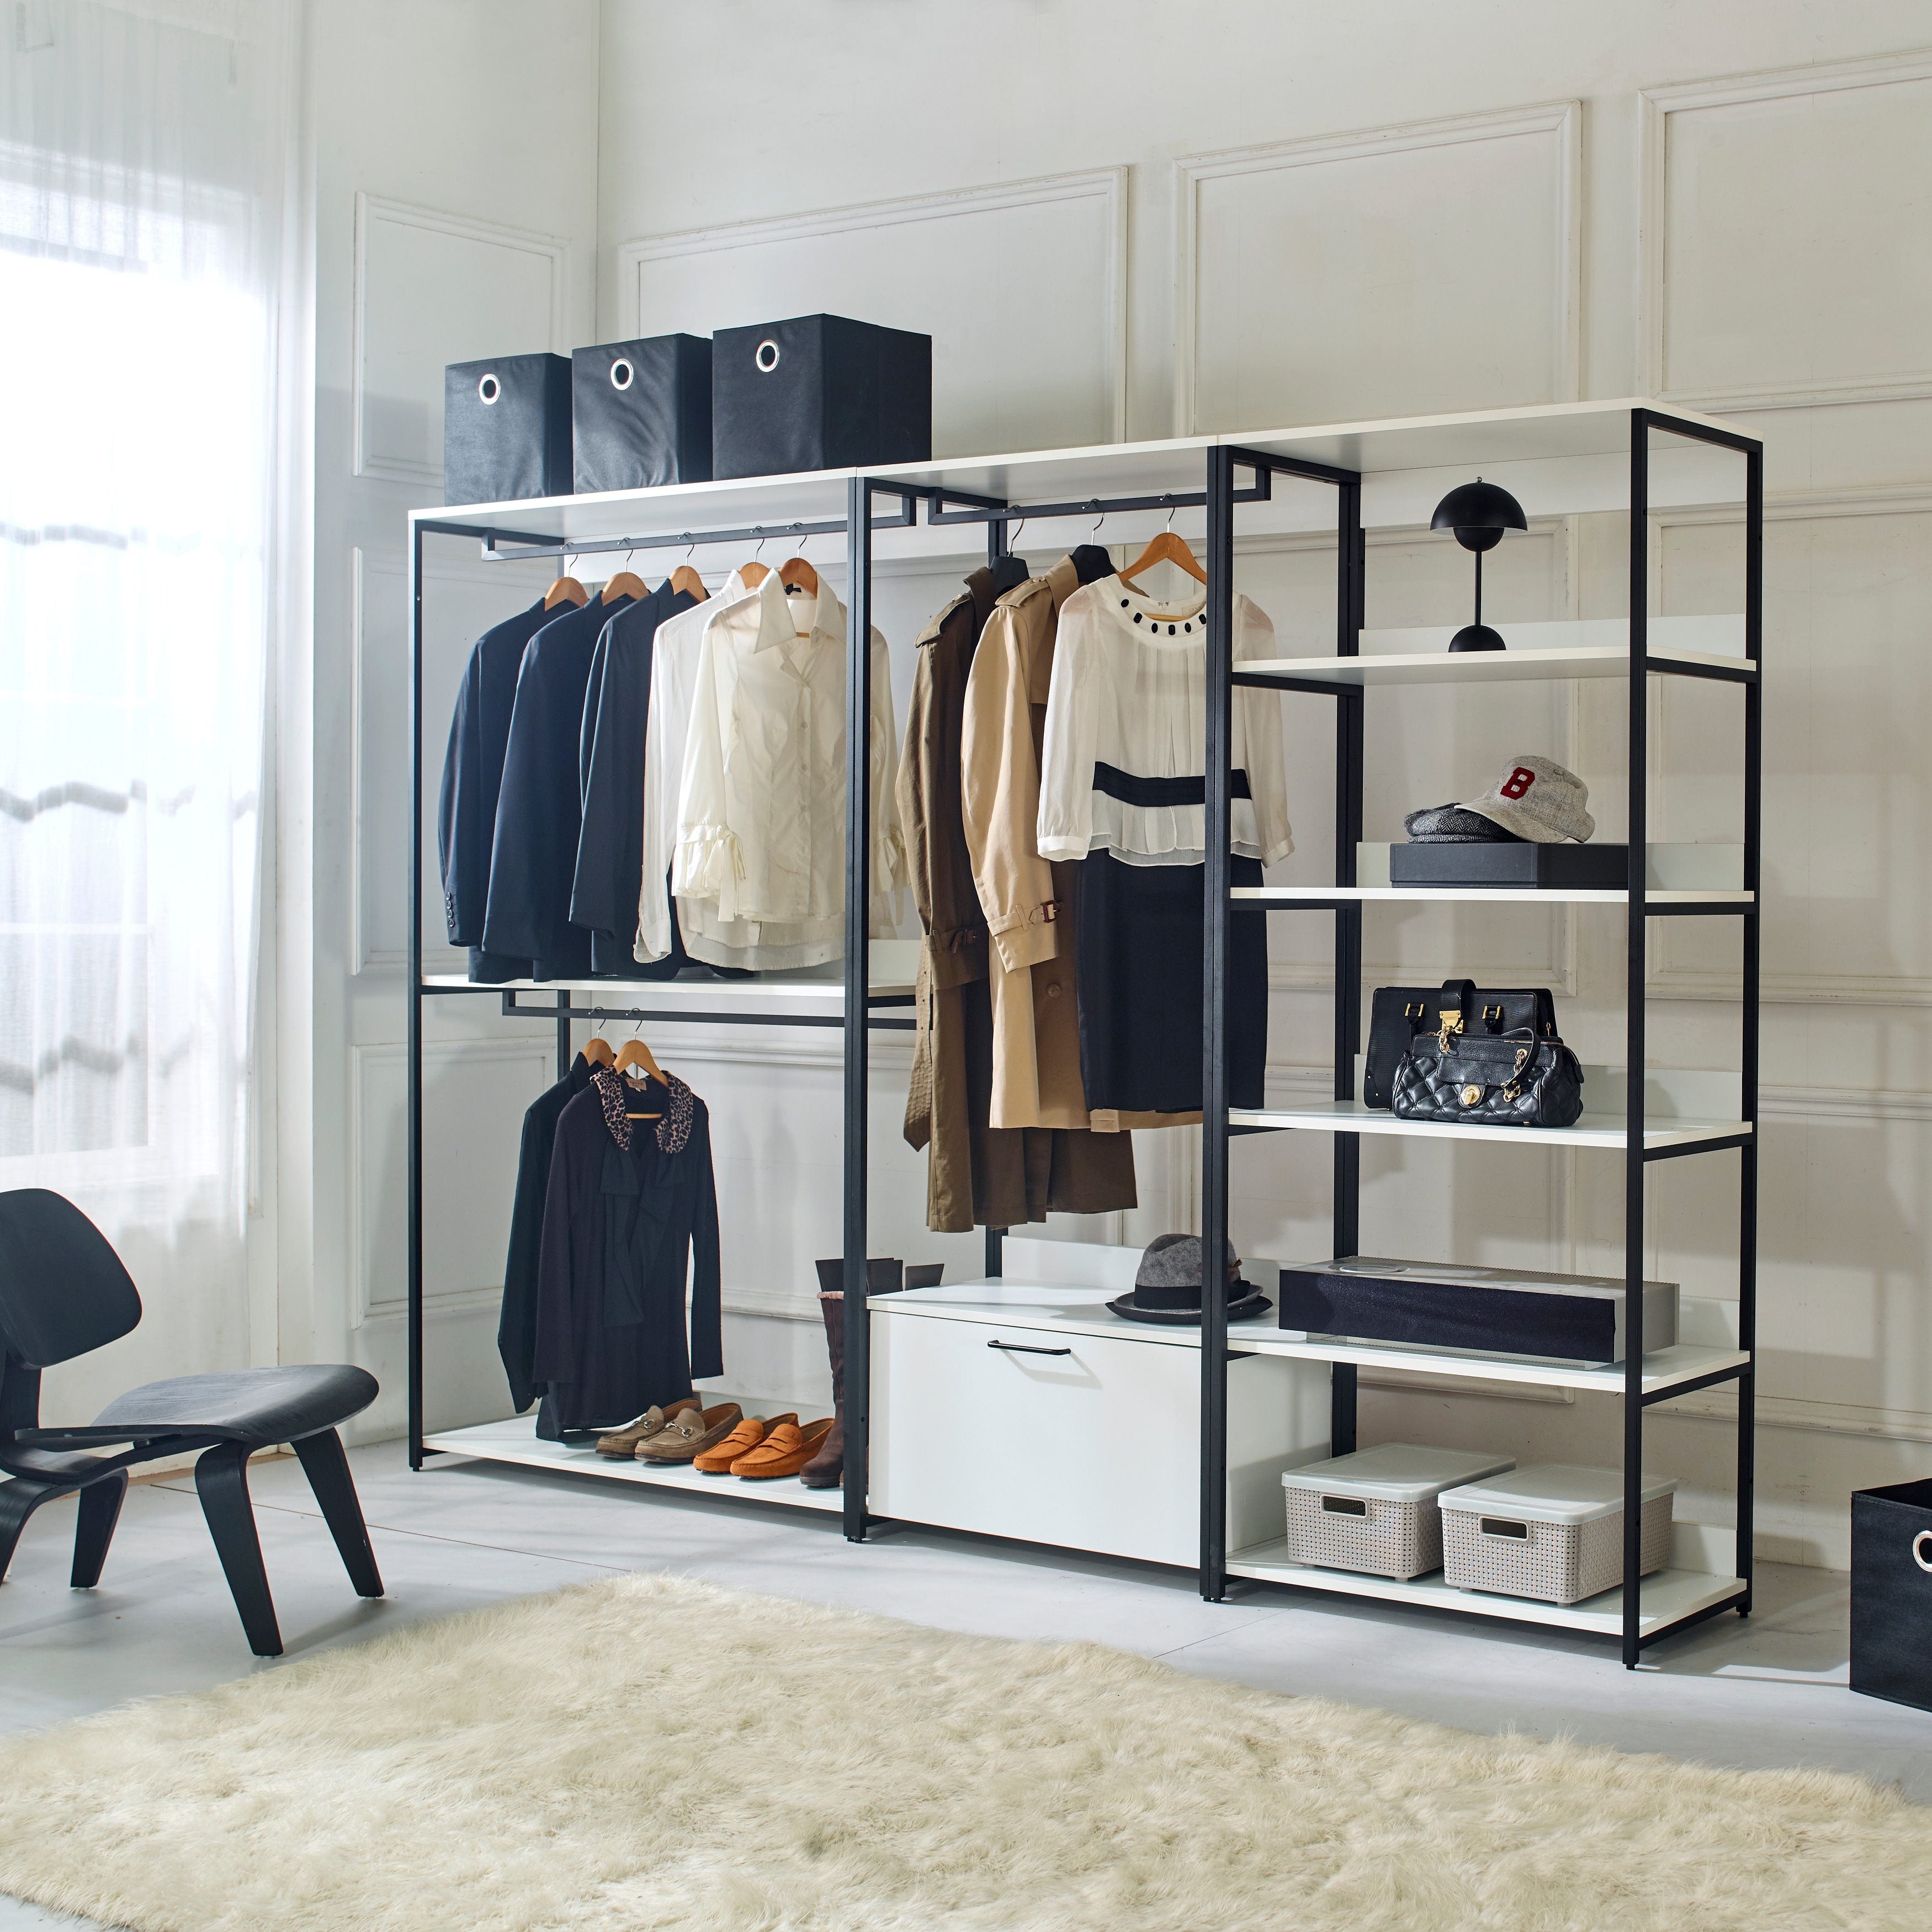 https://ak1.ostkcdn.com/images/products/is/images/direct/c4f2f9d60d8dfa95274a9cd995ce16753867db46/Garment-Rack-White-Freestanding-Walk-in-Wood-Closet-System-with-Metal-Frame%2C-1-Drawer-5-Compartments%2C-Bedroom-Clothing-Armoires.jpg